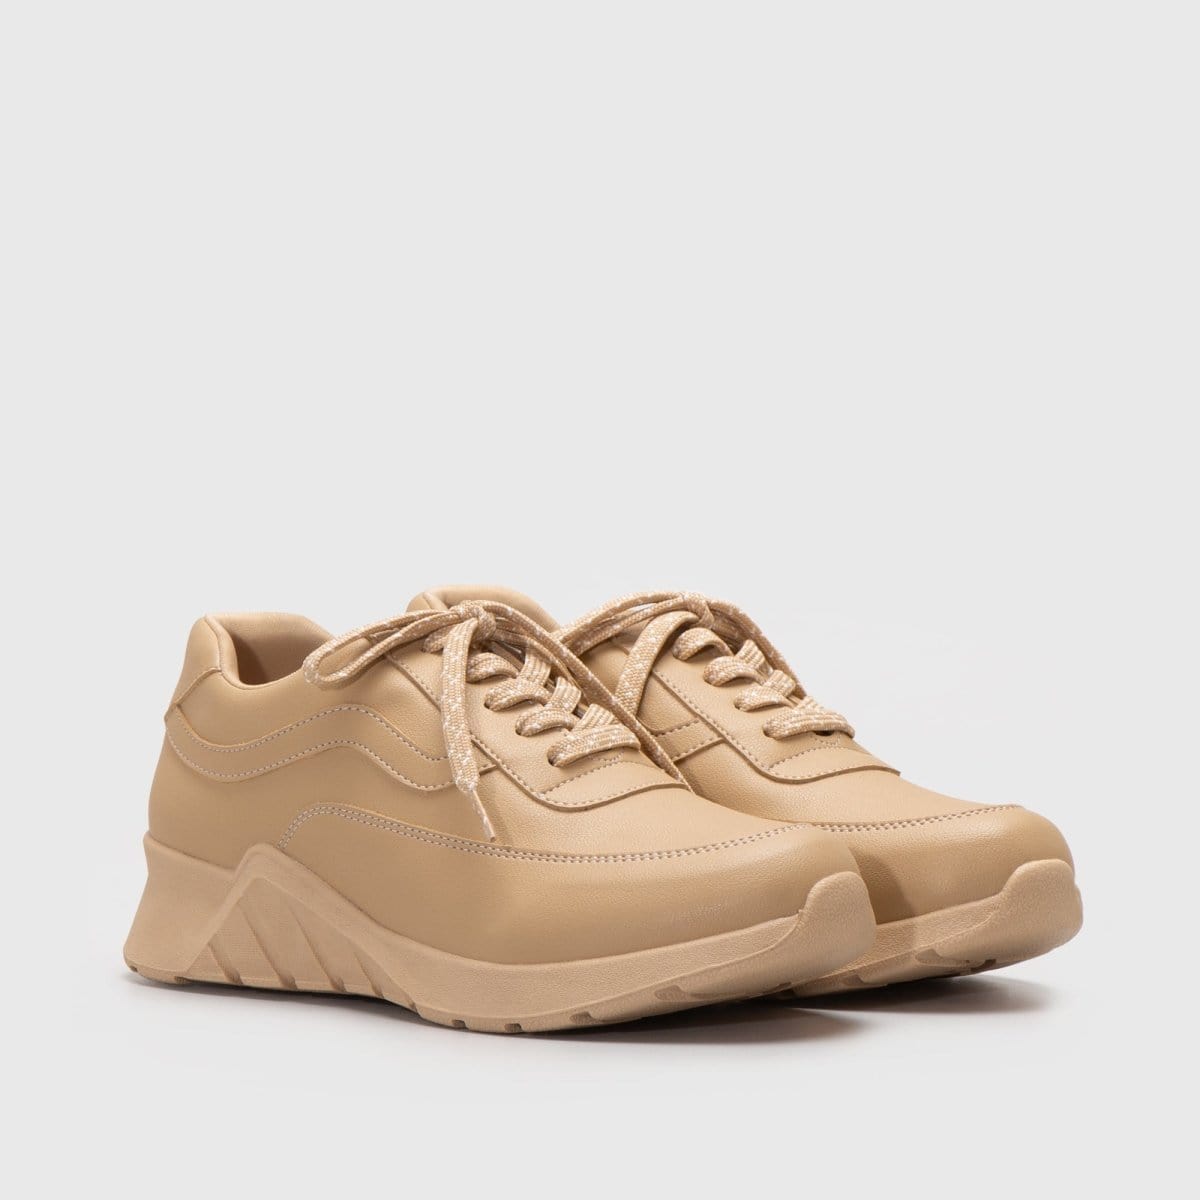 Adorable Projects Official Sneakers 36 / Nude Kikimora Sneakers Nude